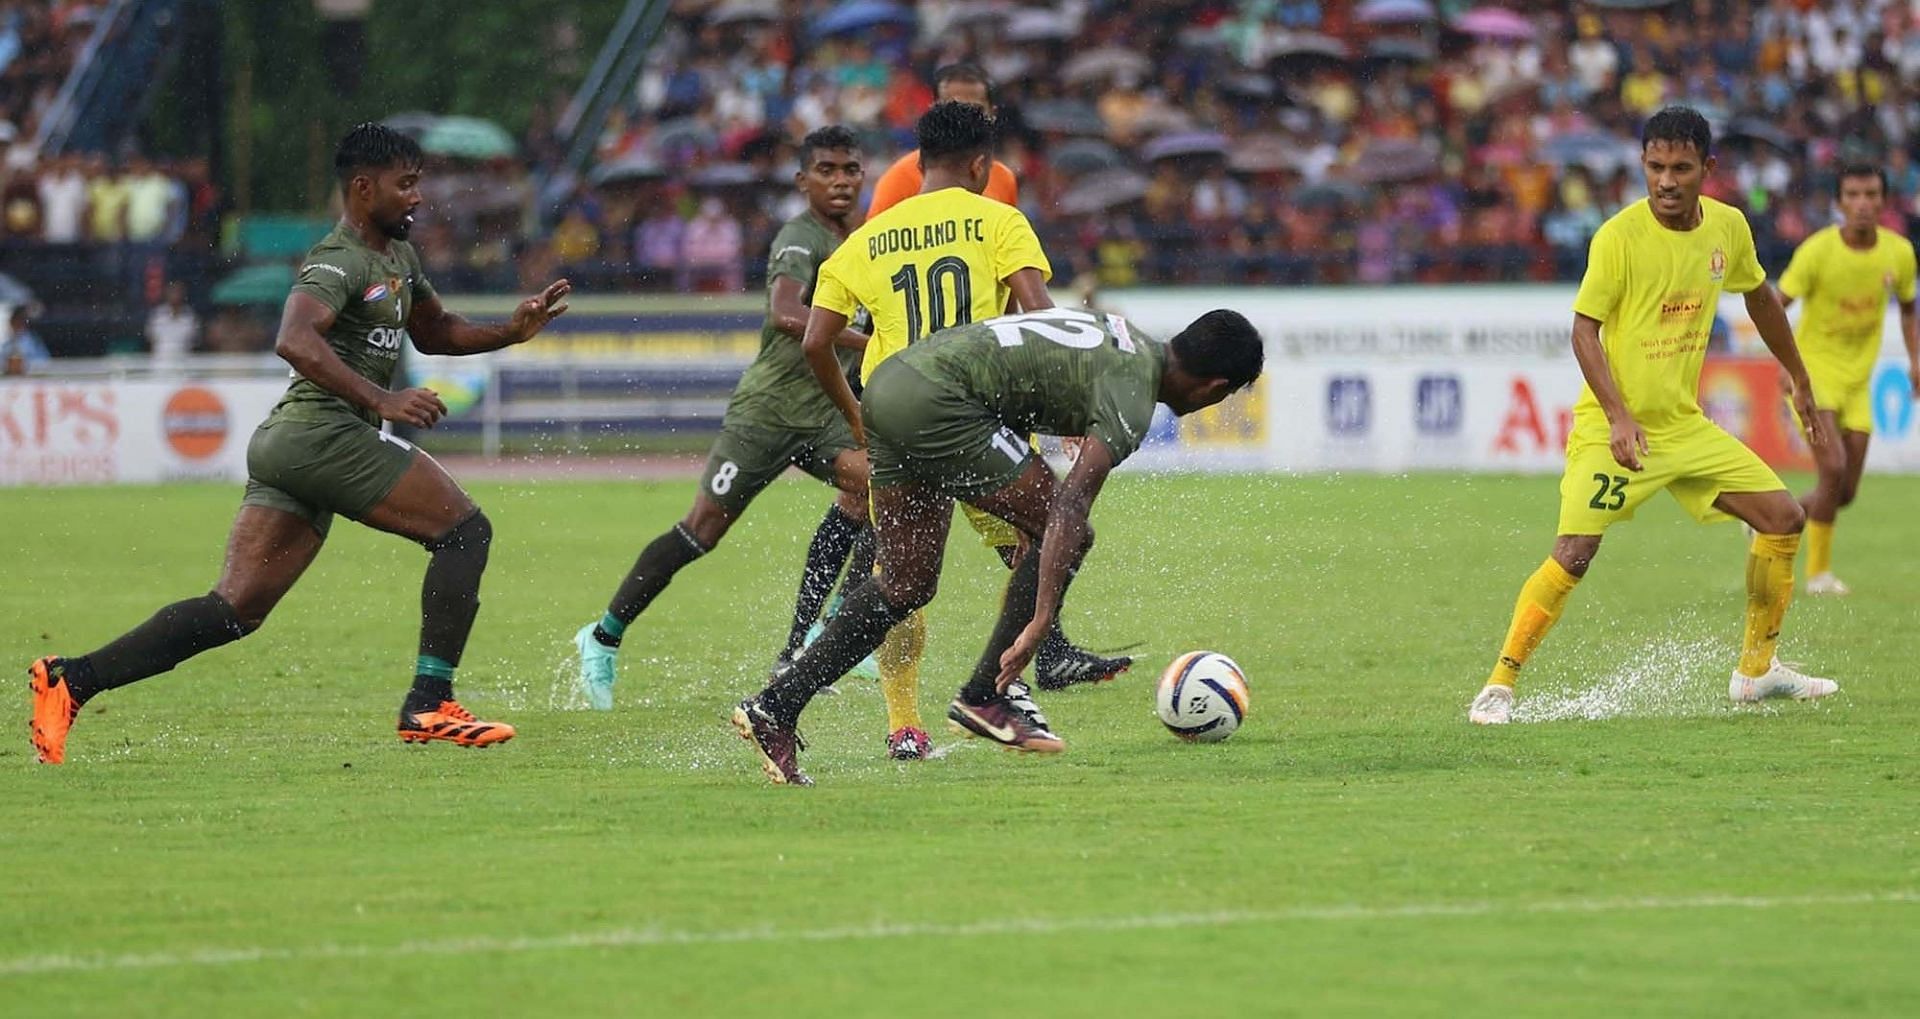 A snap from the Durand Cup 2023 match between Odisha FC and Bodoland FC. [Credits: Durand Cup media]